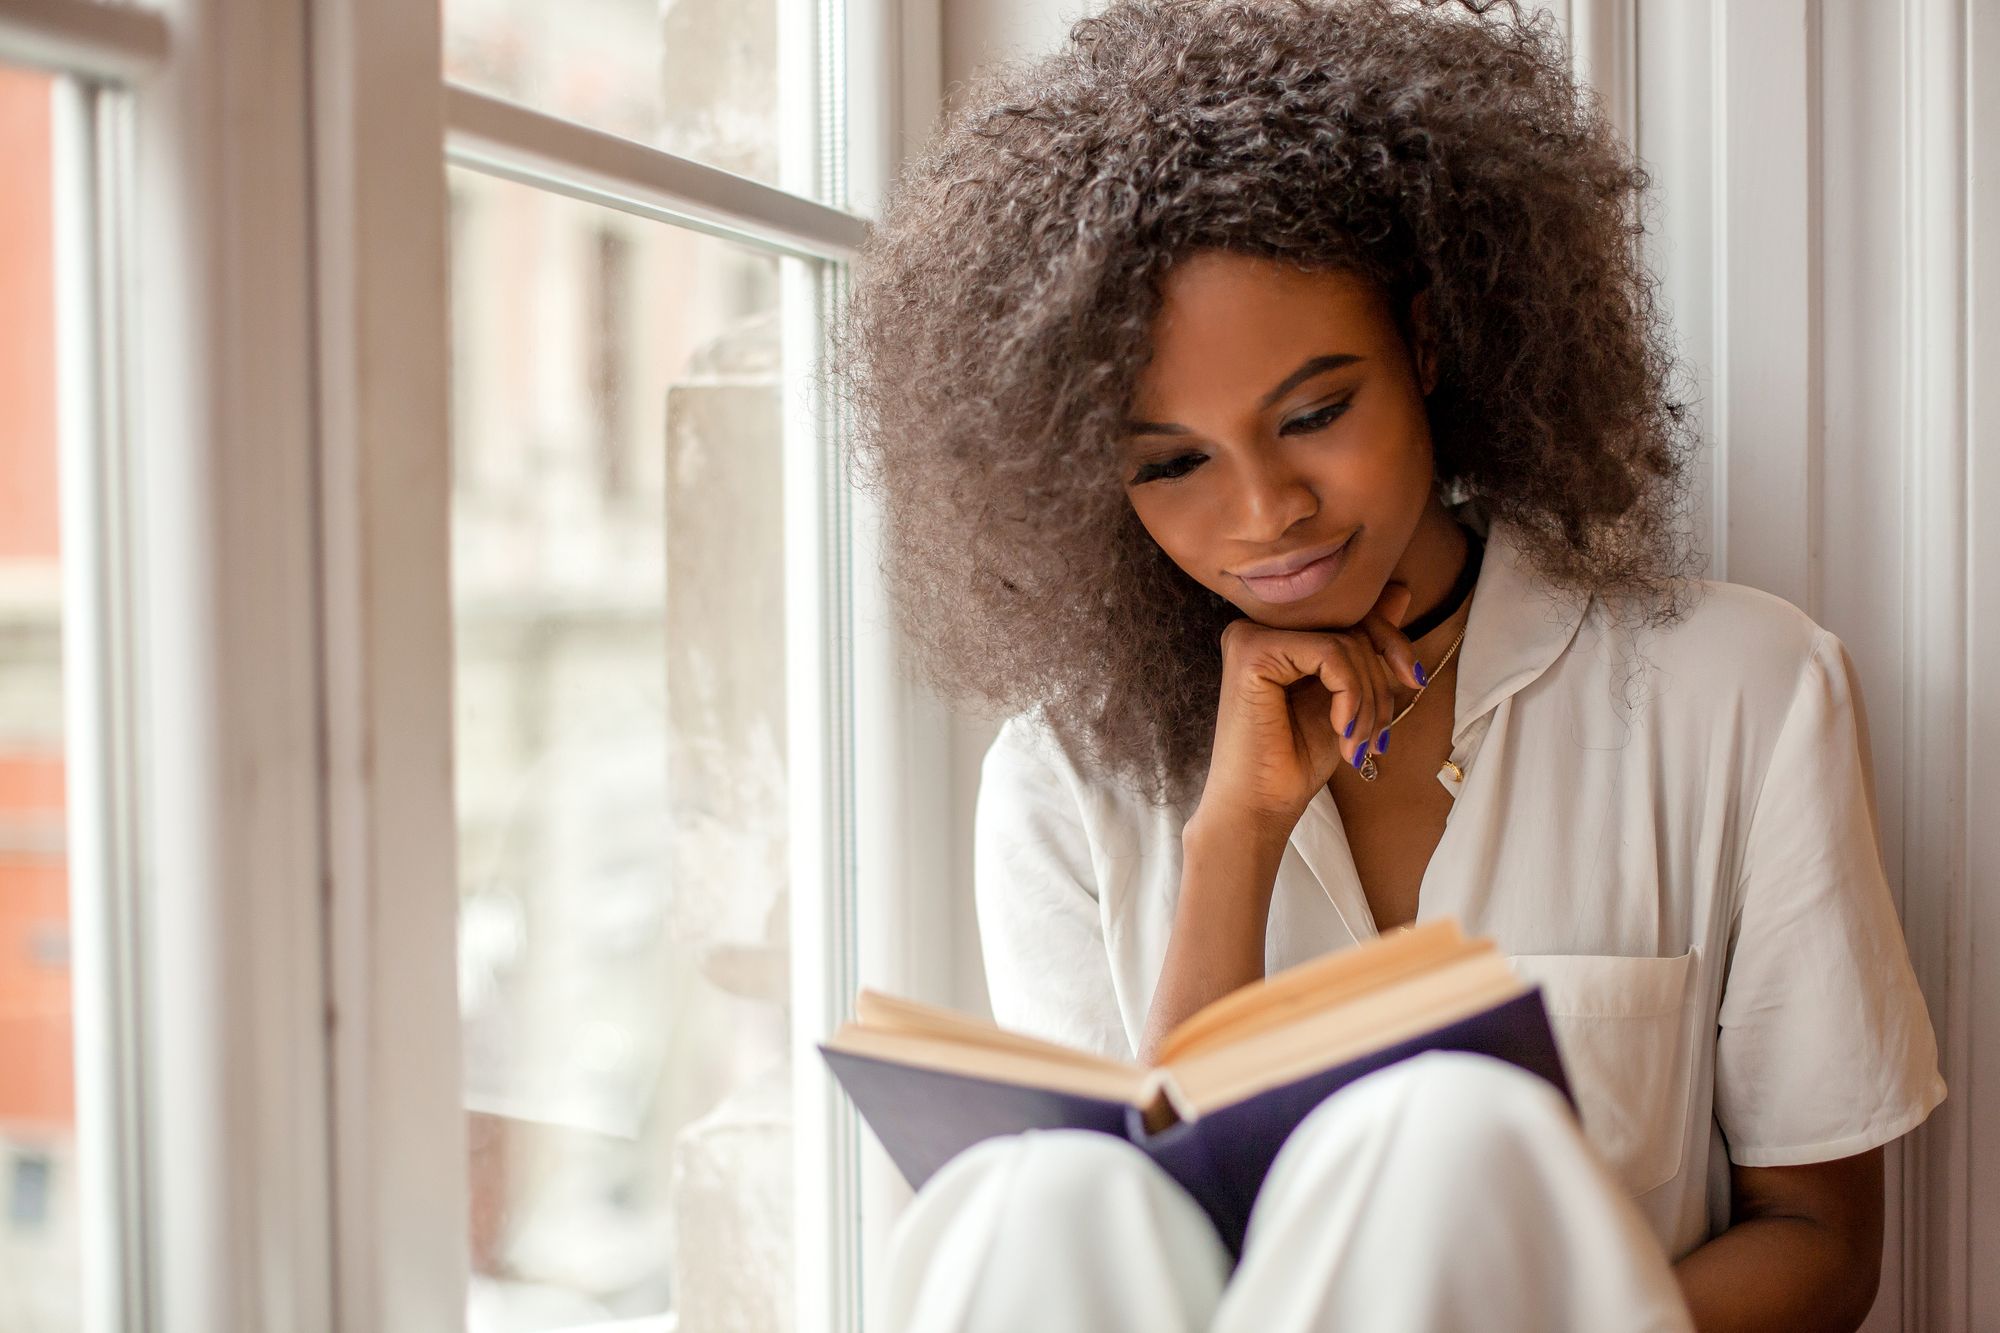 Here are 8 reads to keep you busy while you #stayathome